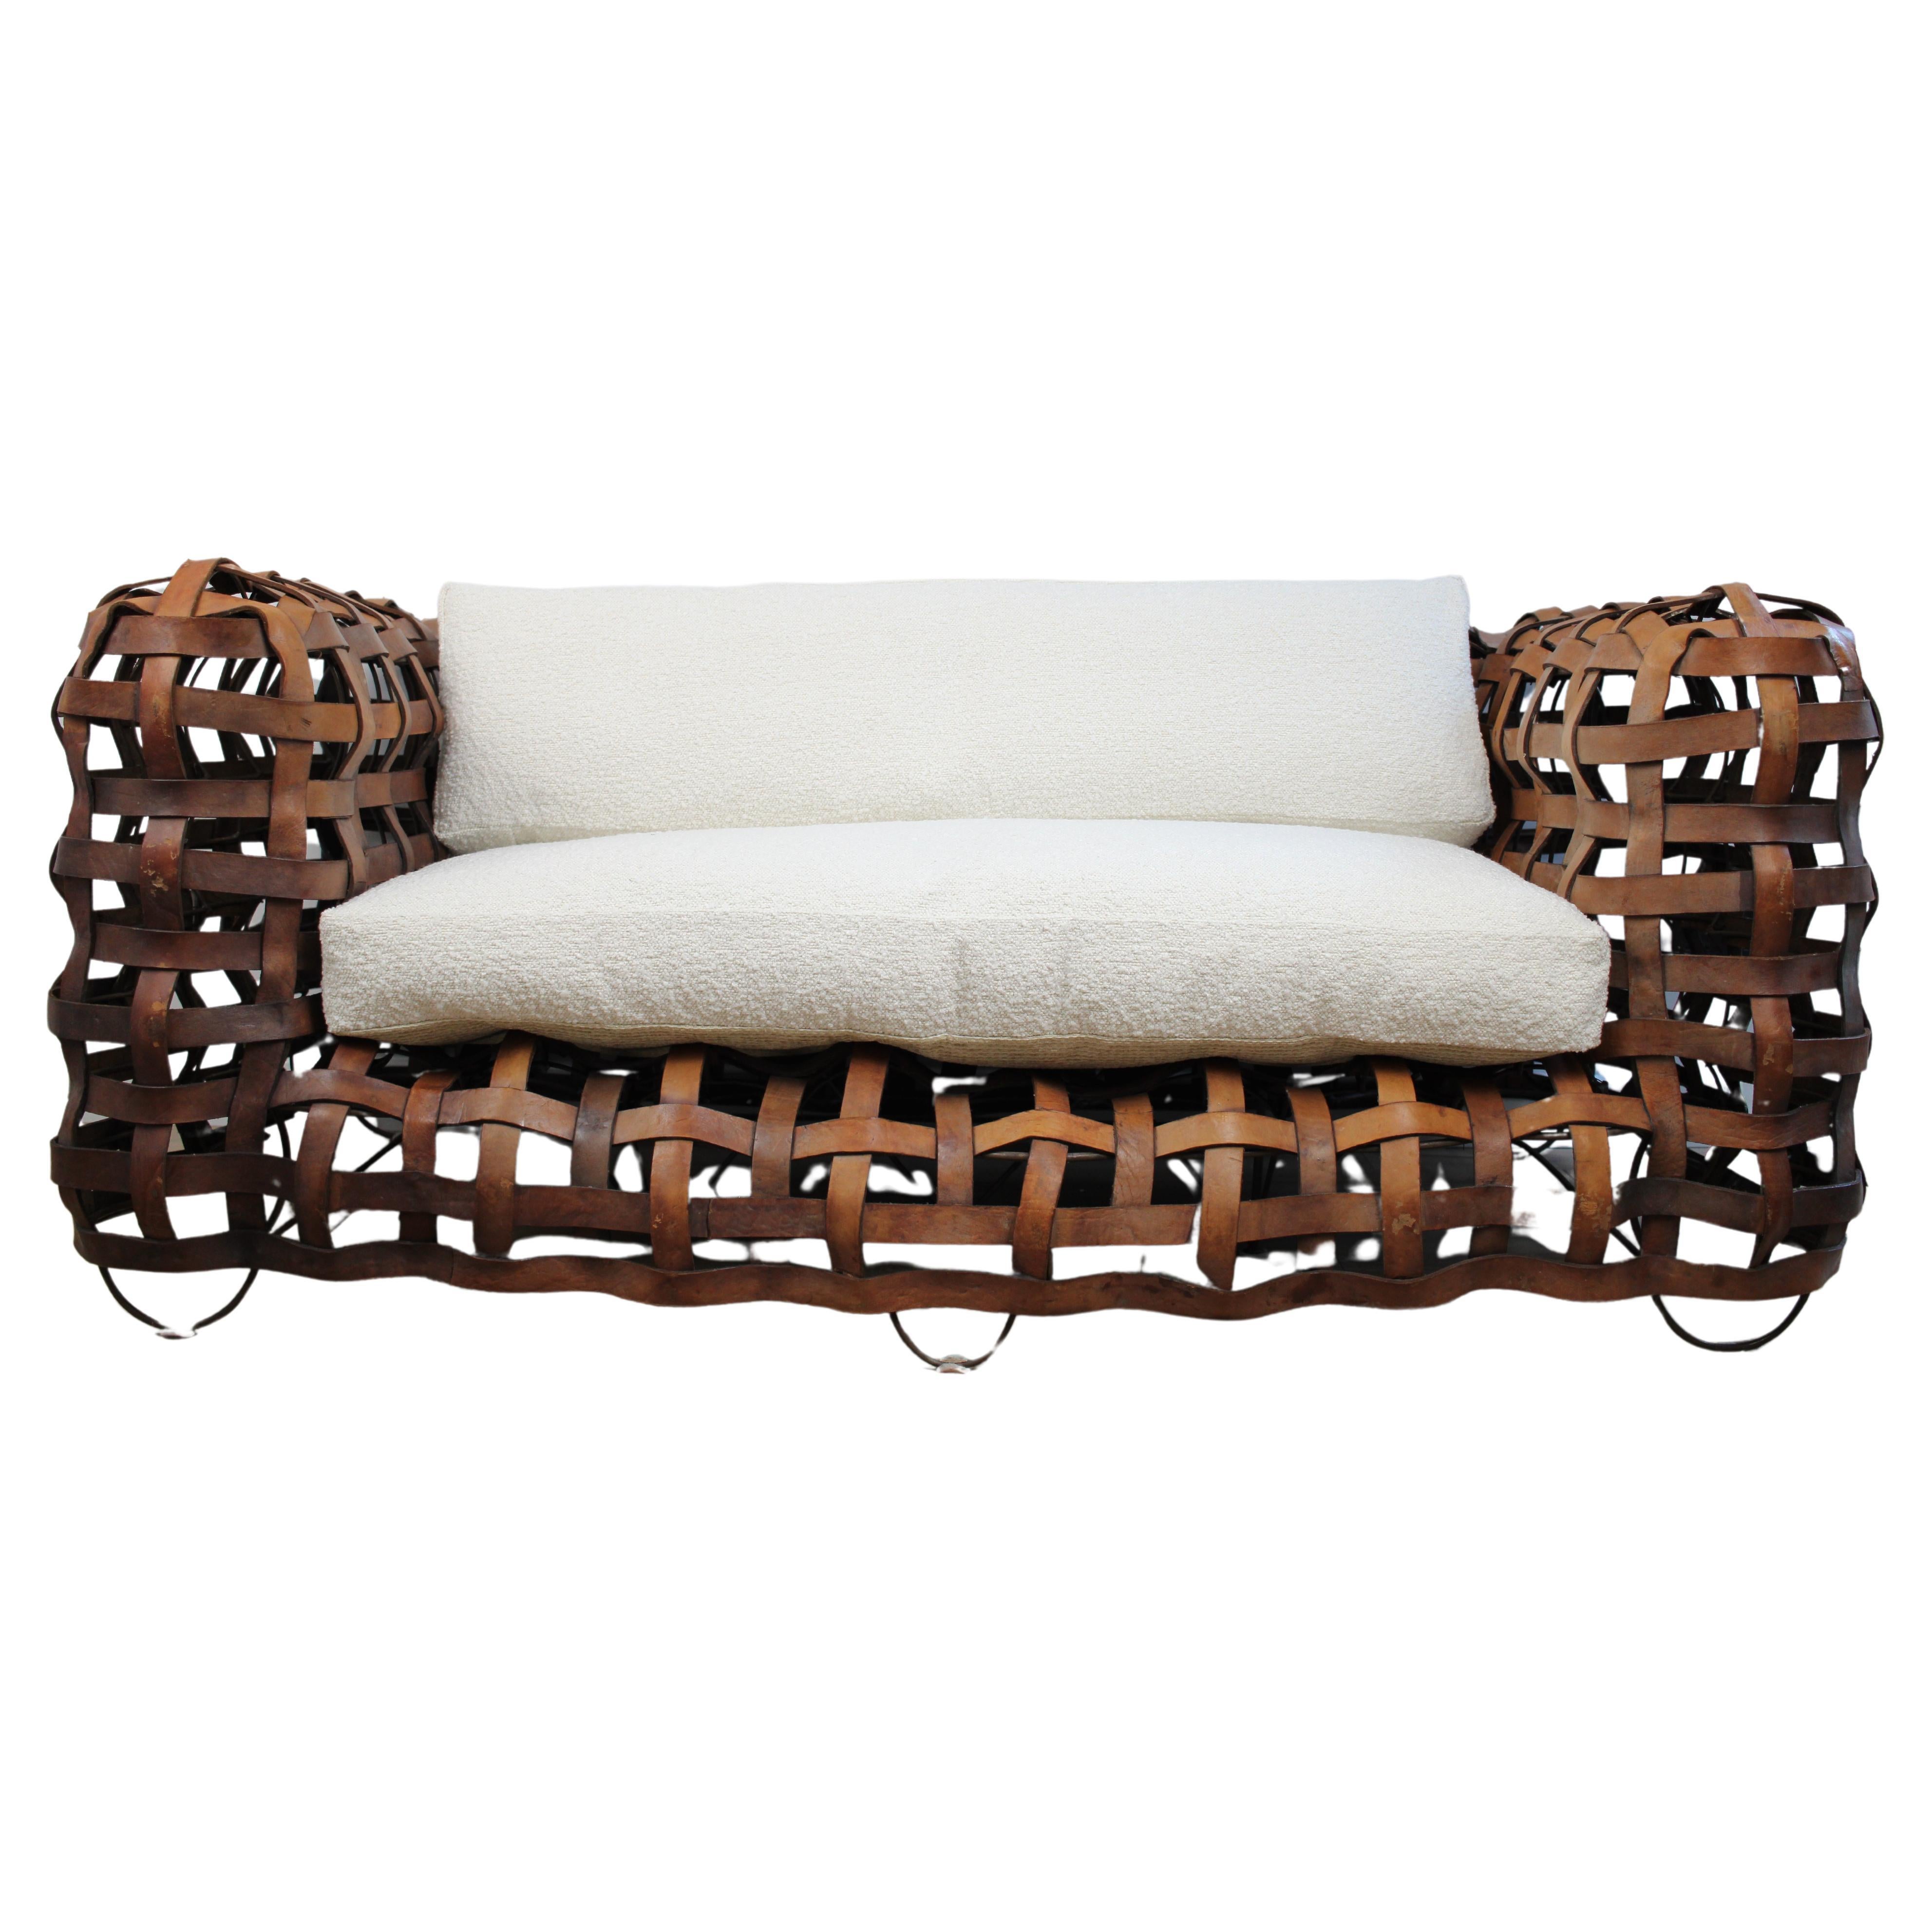 A sculptural Vintage woven leather strap sofa with feather cushions in boucle